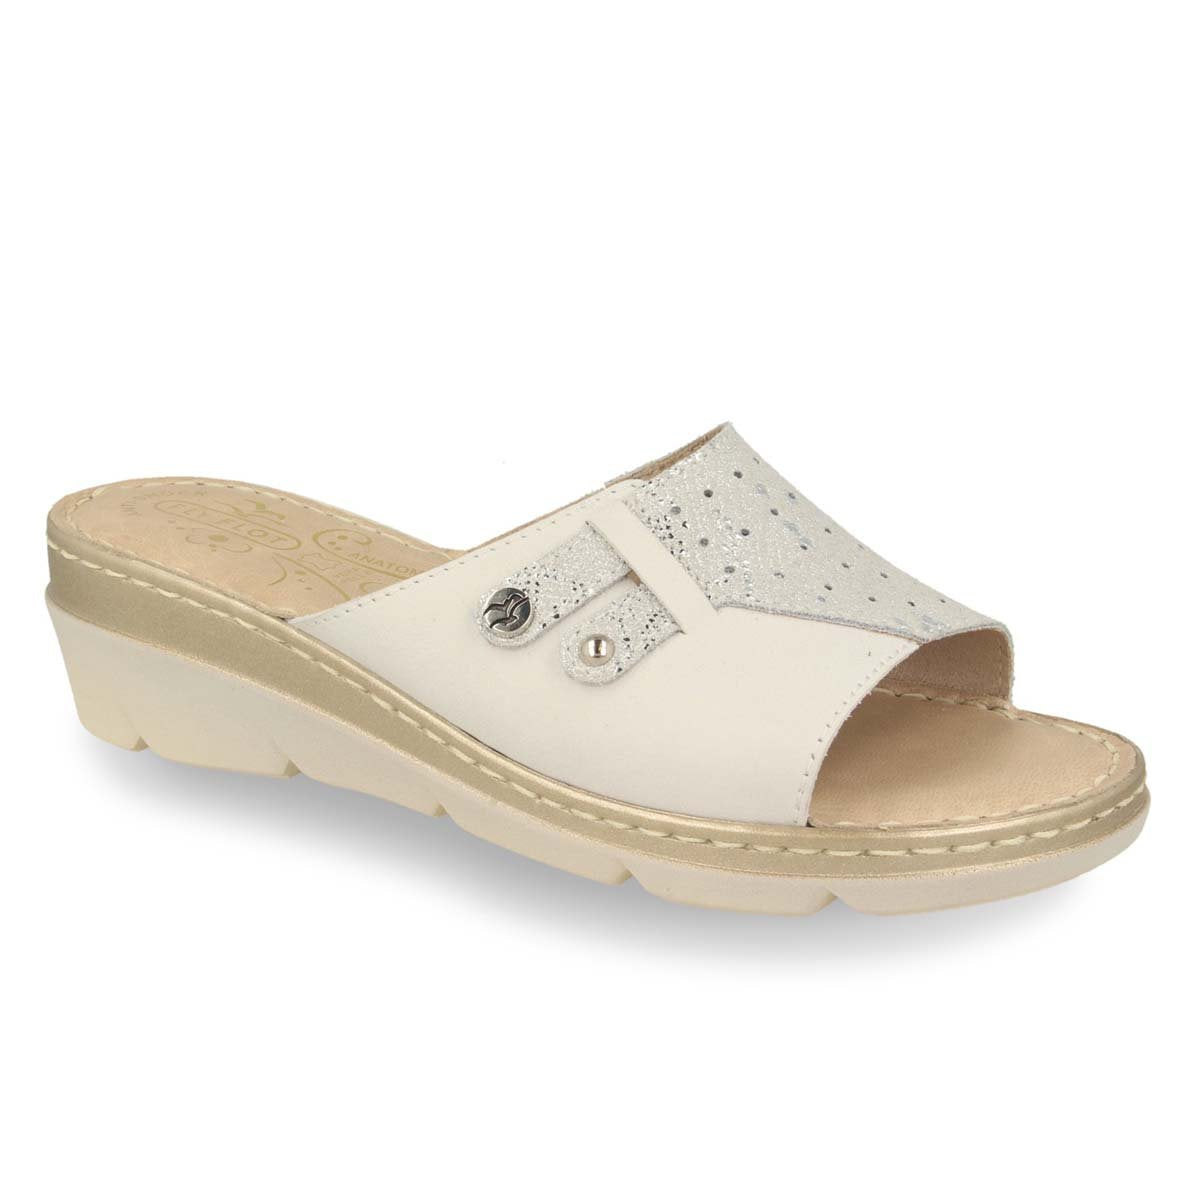 See the Leather One Strap Slide Women Sandals With Anti-Shock Cushioned Leather Insole in the colour BEIGE, available in various sizes